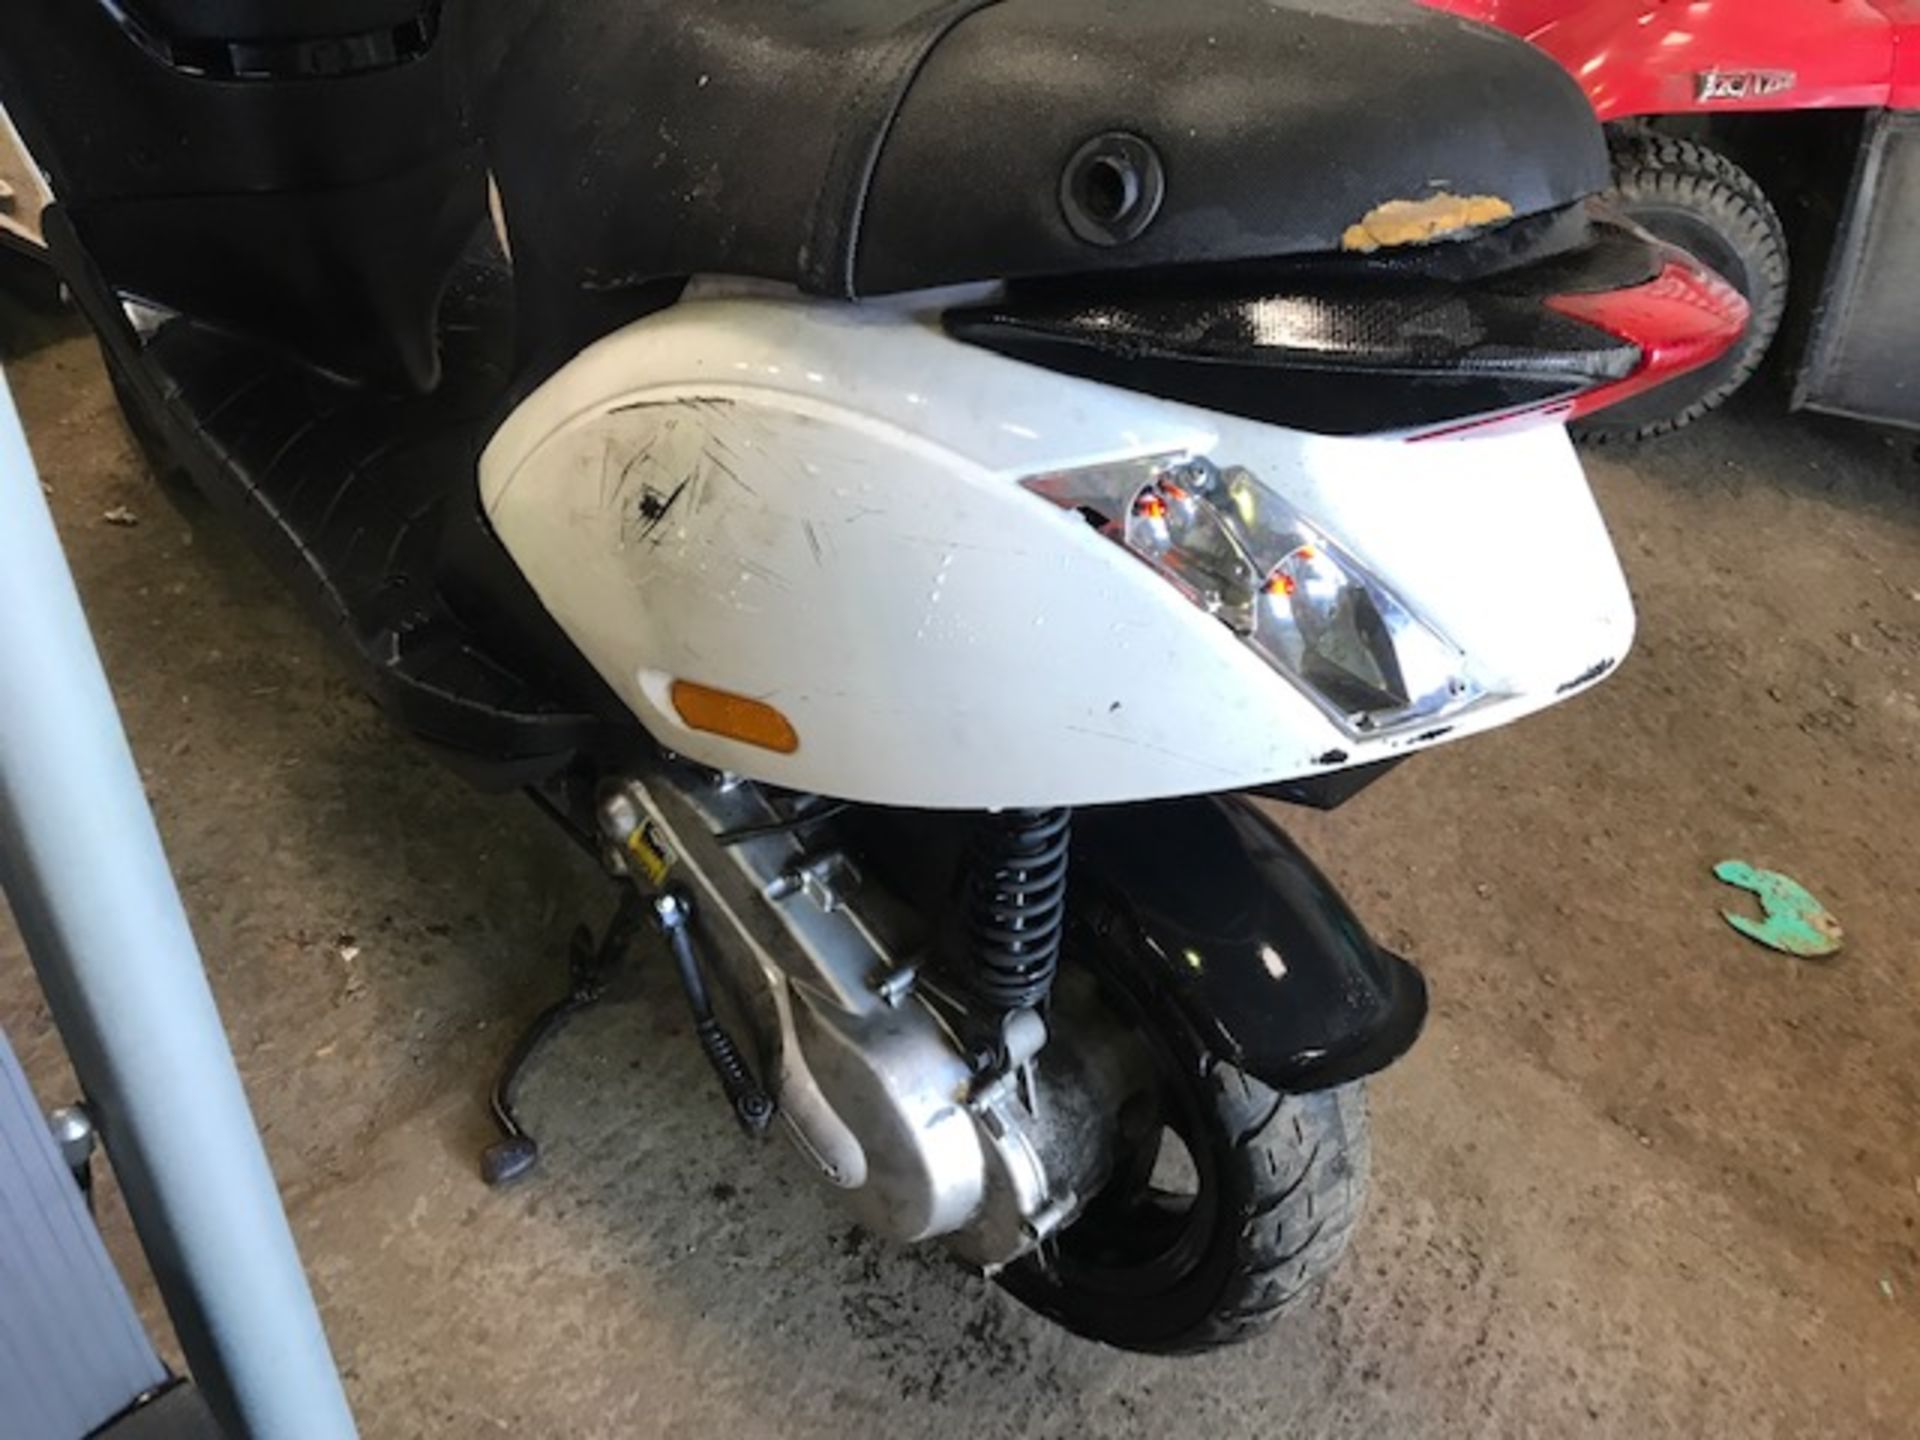 piaggio scooter for parts..incomplete...not registered..parts missing - Image 4 of 7